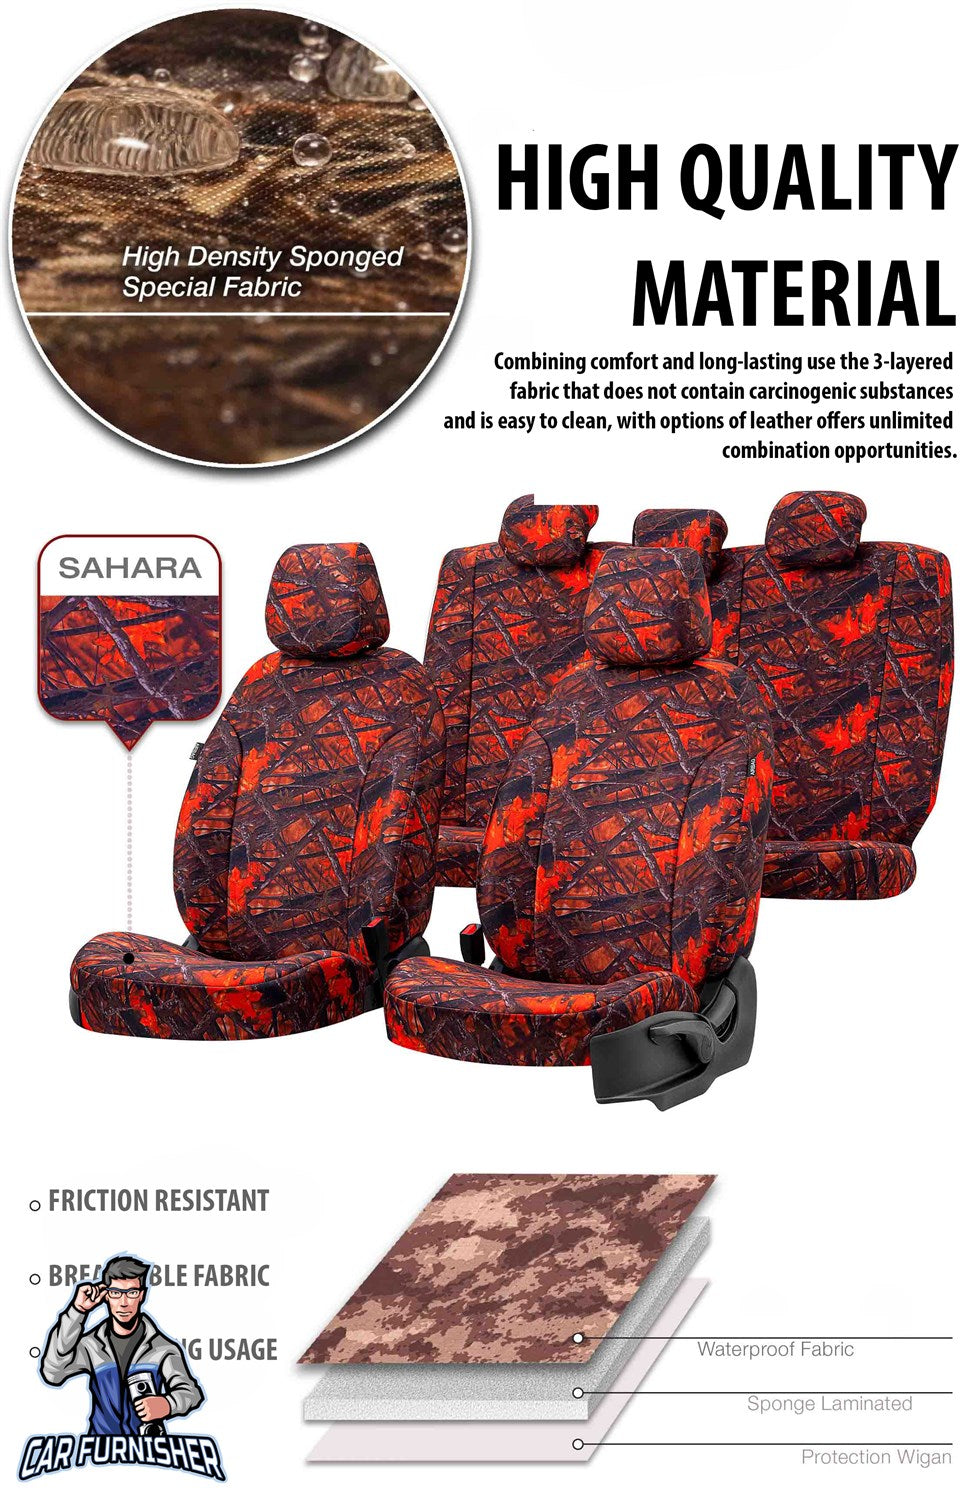 Scania G Seat Cover Camouflage Waterproof Design Montblanc Camo Front Seats (2 Seats + Handrest + Headrests) Waterproof Fabric